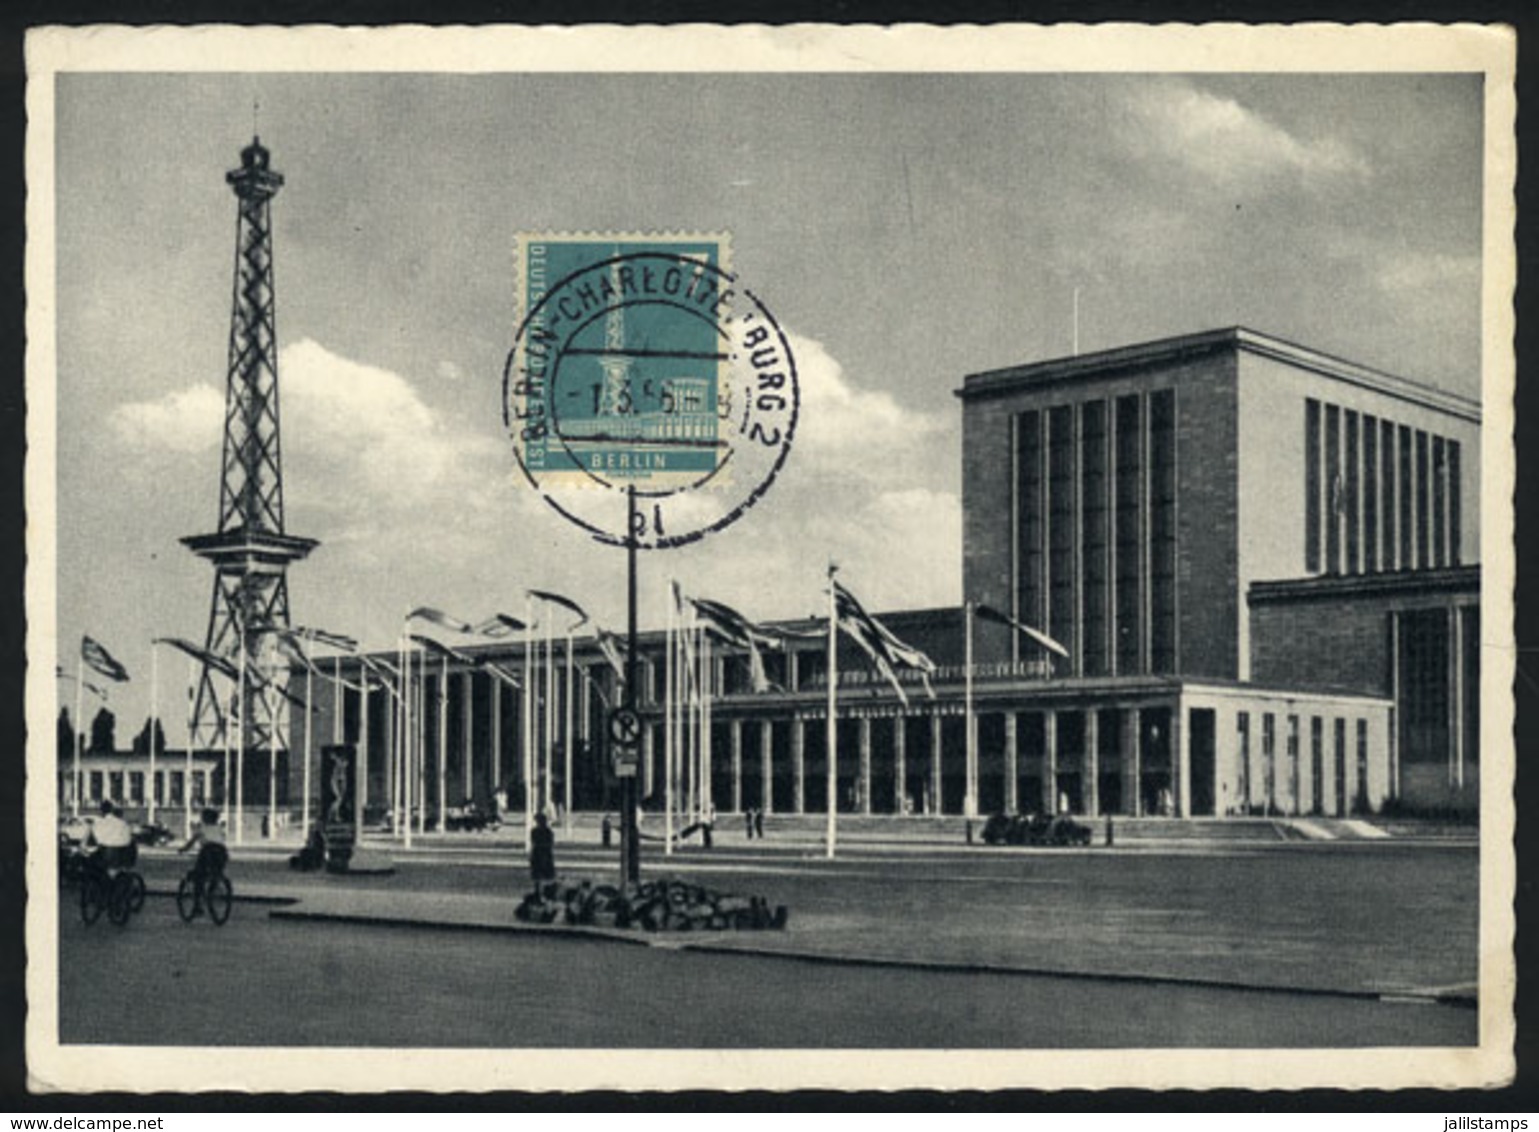 131 GERMANY BERLIN: BERLIN: Exhibition Halls In Funkturm, Maximum Card Of 1/MAR/1956, VF Quality - Covers & Documents